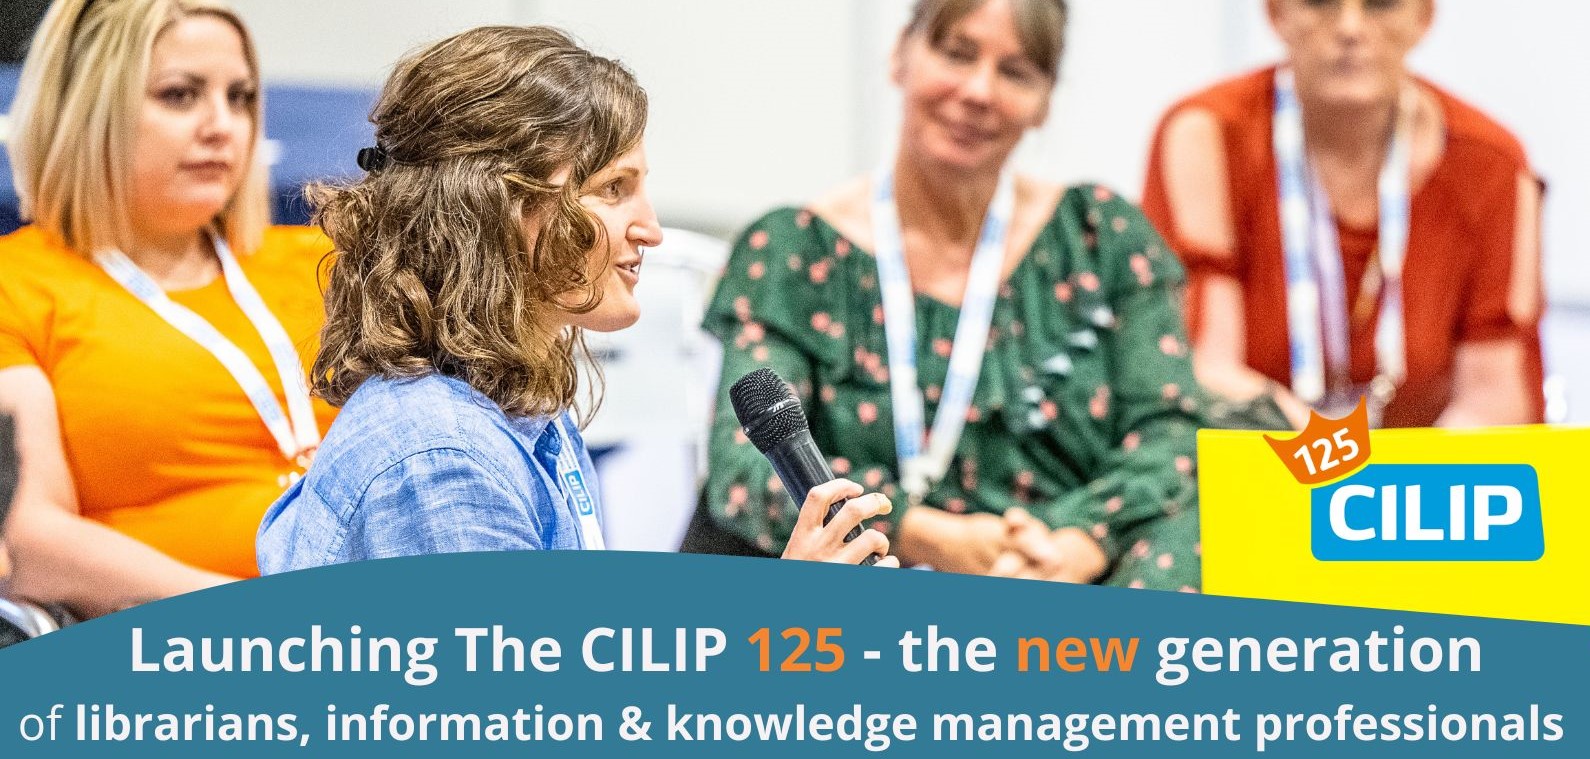 Launching The CILIP 125 - the new generation. With a background photograph showing professionals in discussion.